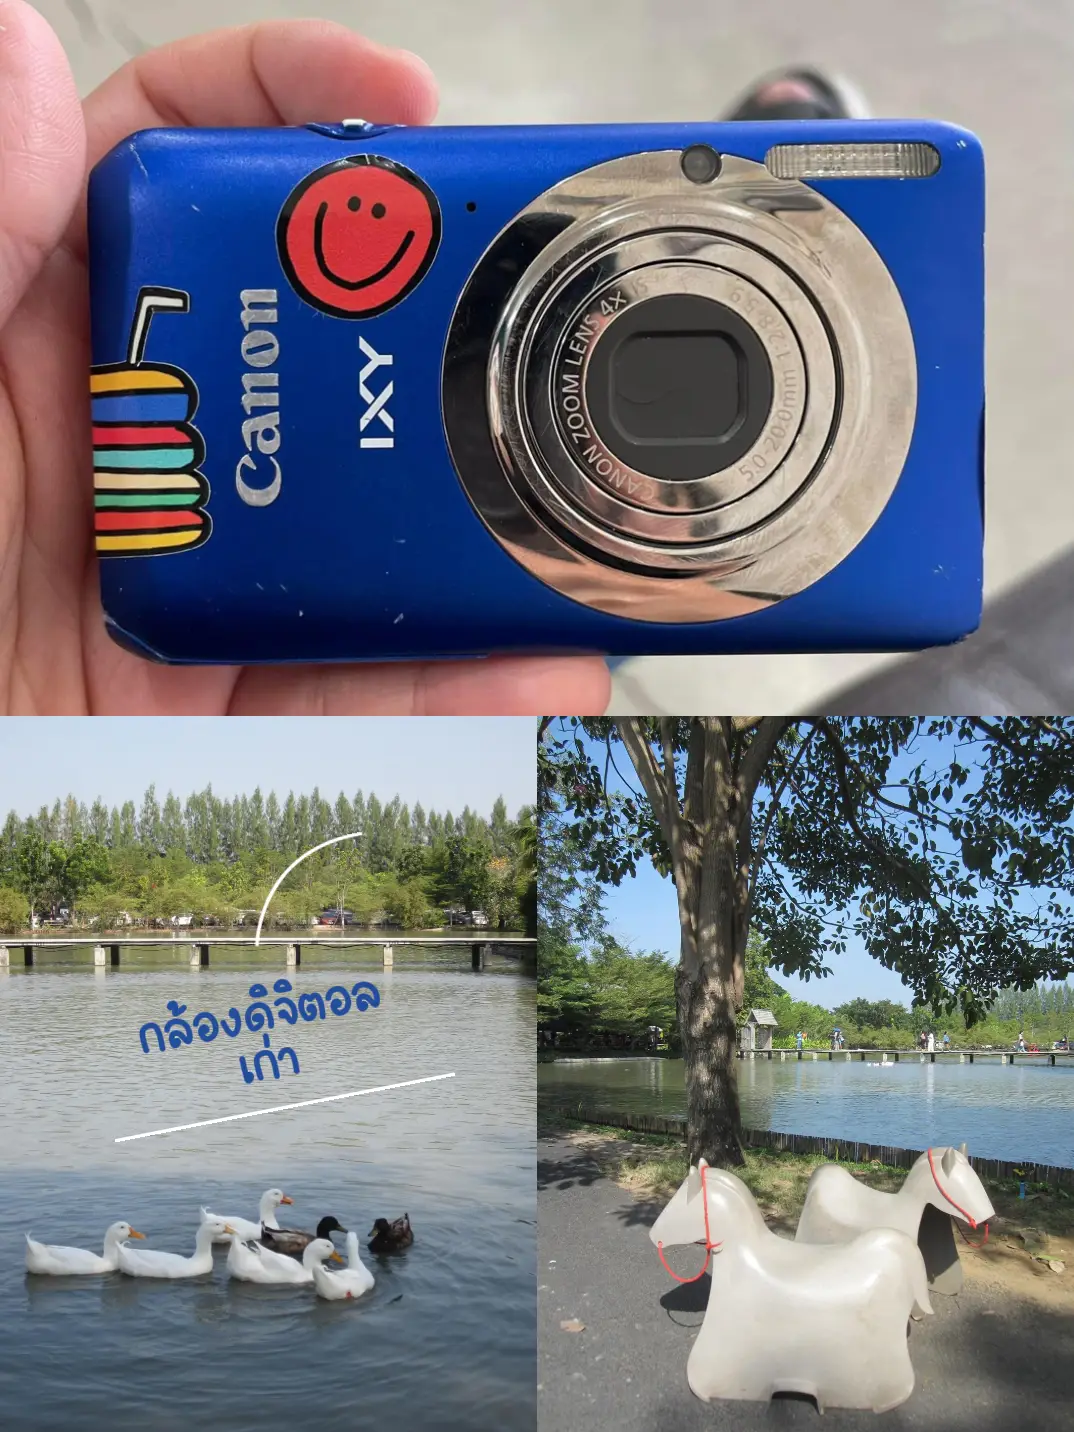 Canon ixy 210f | Gallery posted by Ccurb | Lemon8